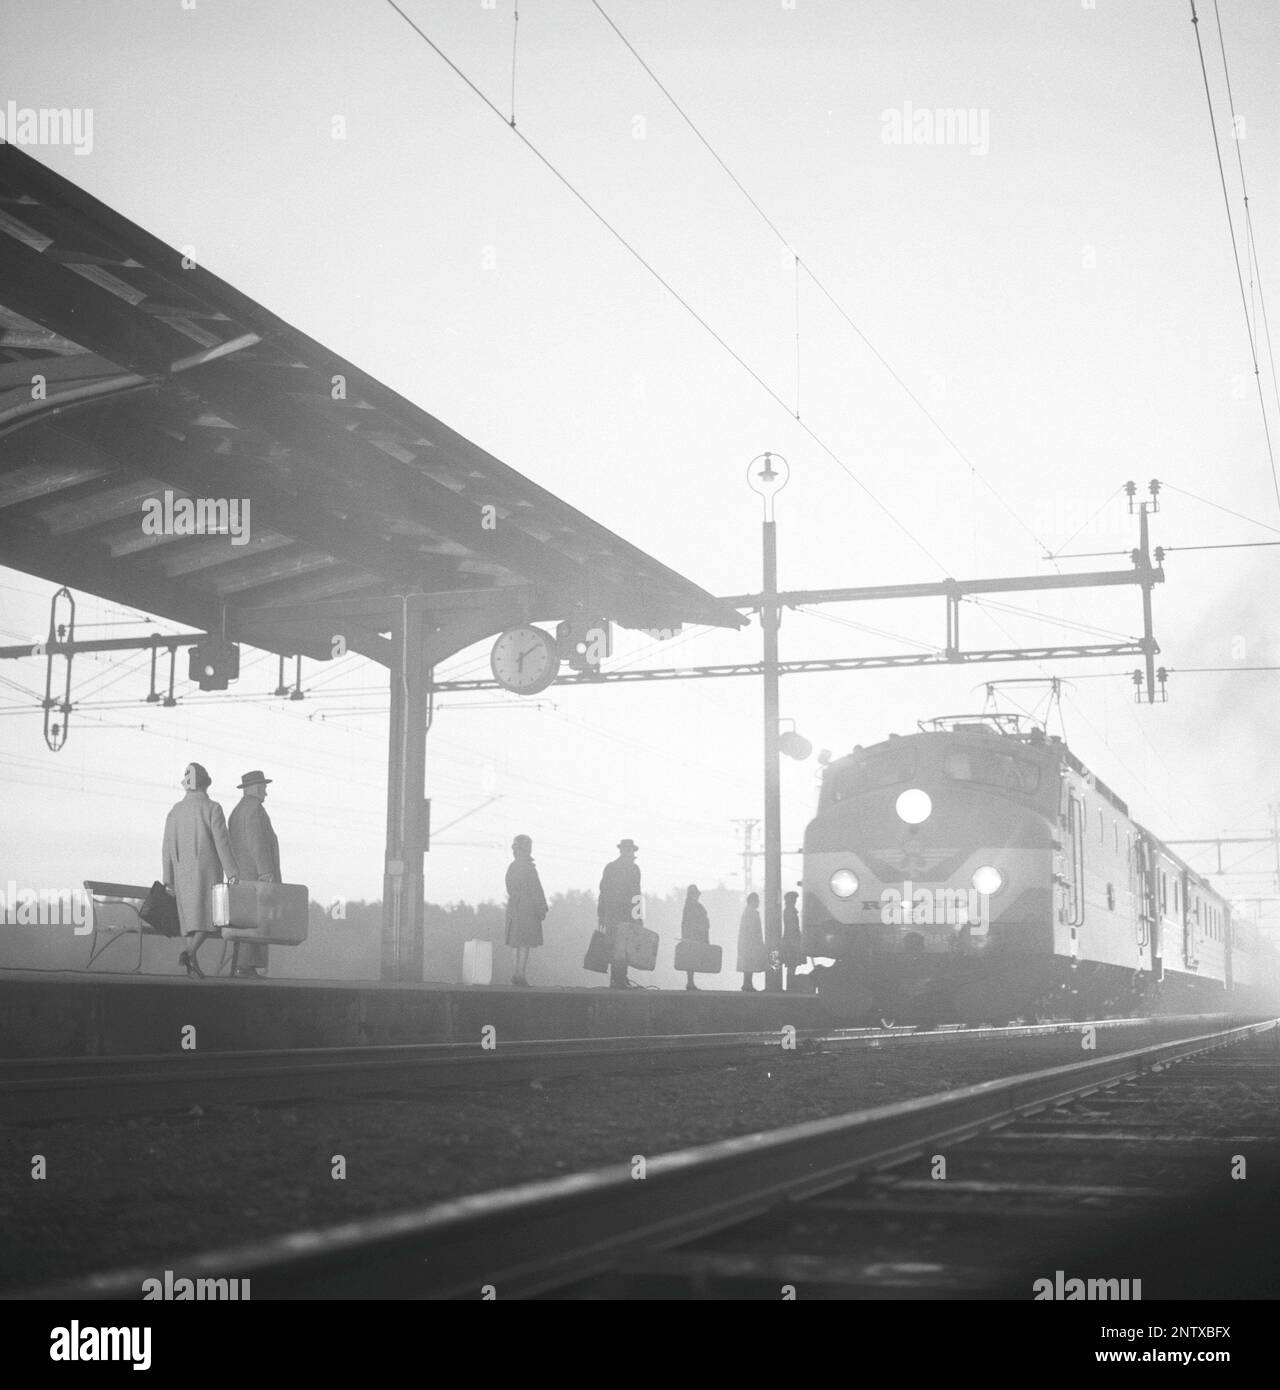 Railway station in the 1960s. Passengers are seen on the platform ready to board the train that is arriving in the misty light at ten past six. Sweden 1966 Kristoffersson ref DD106-9 Stock Photo